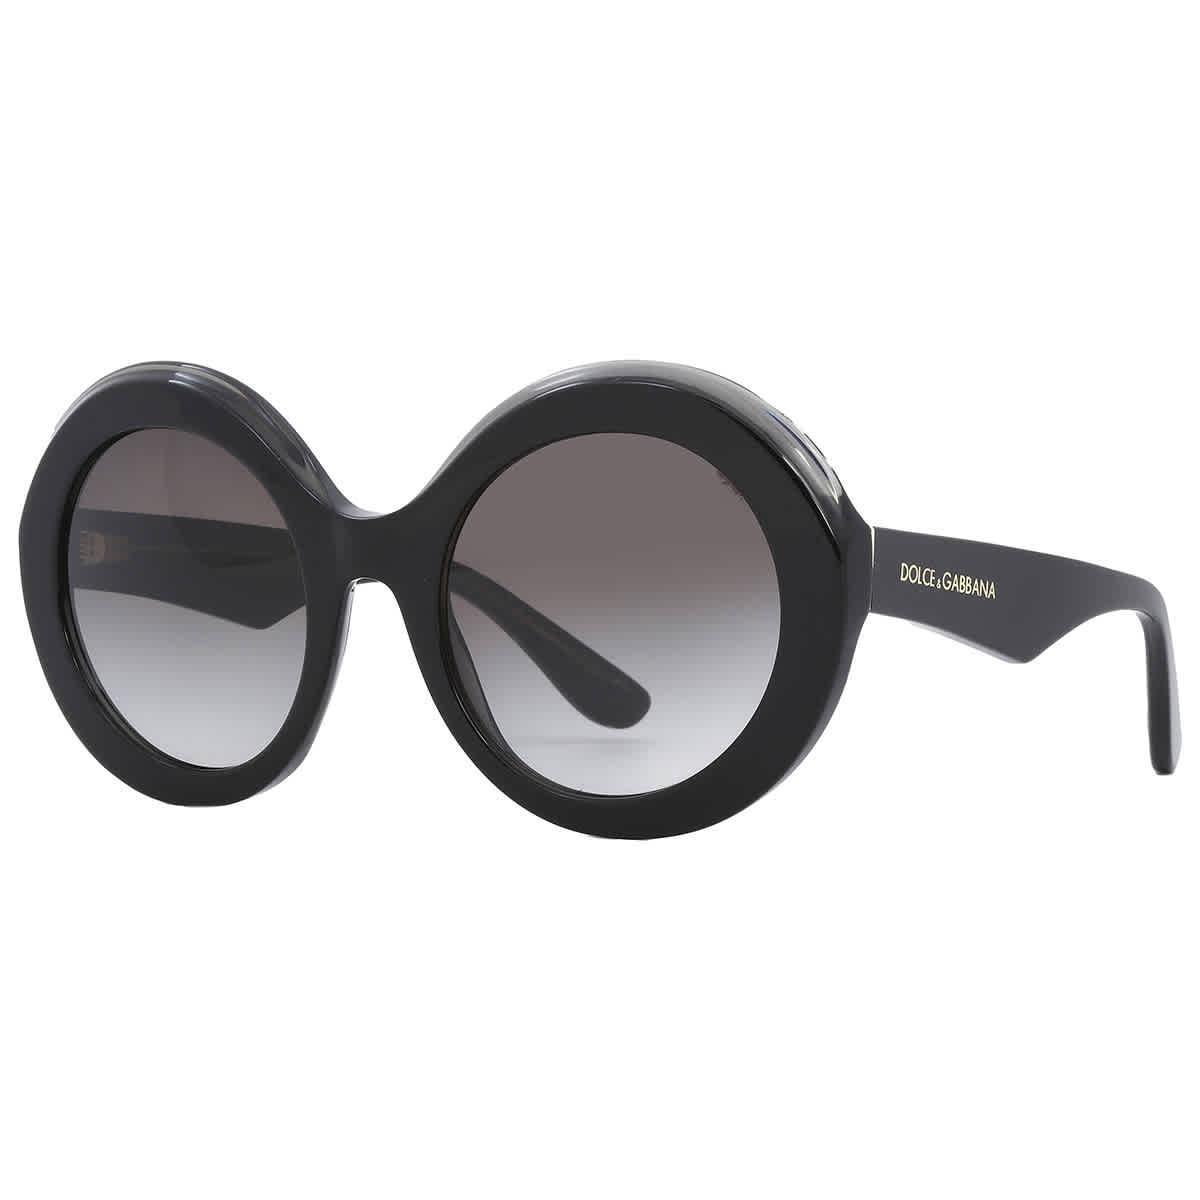 The Fendigraphy 54mm Oval Sunglasses Product Image